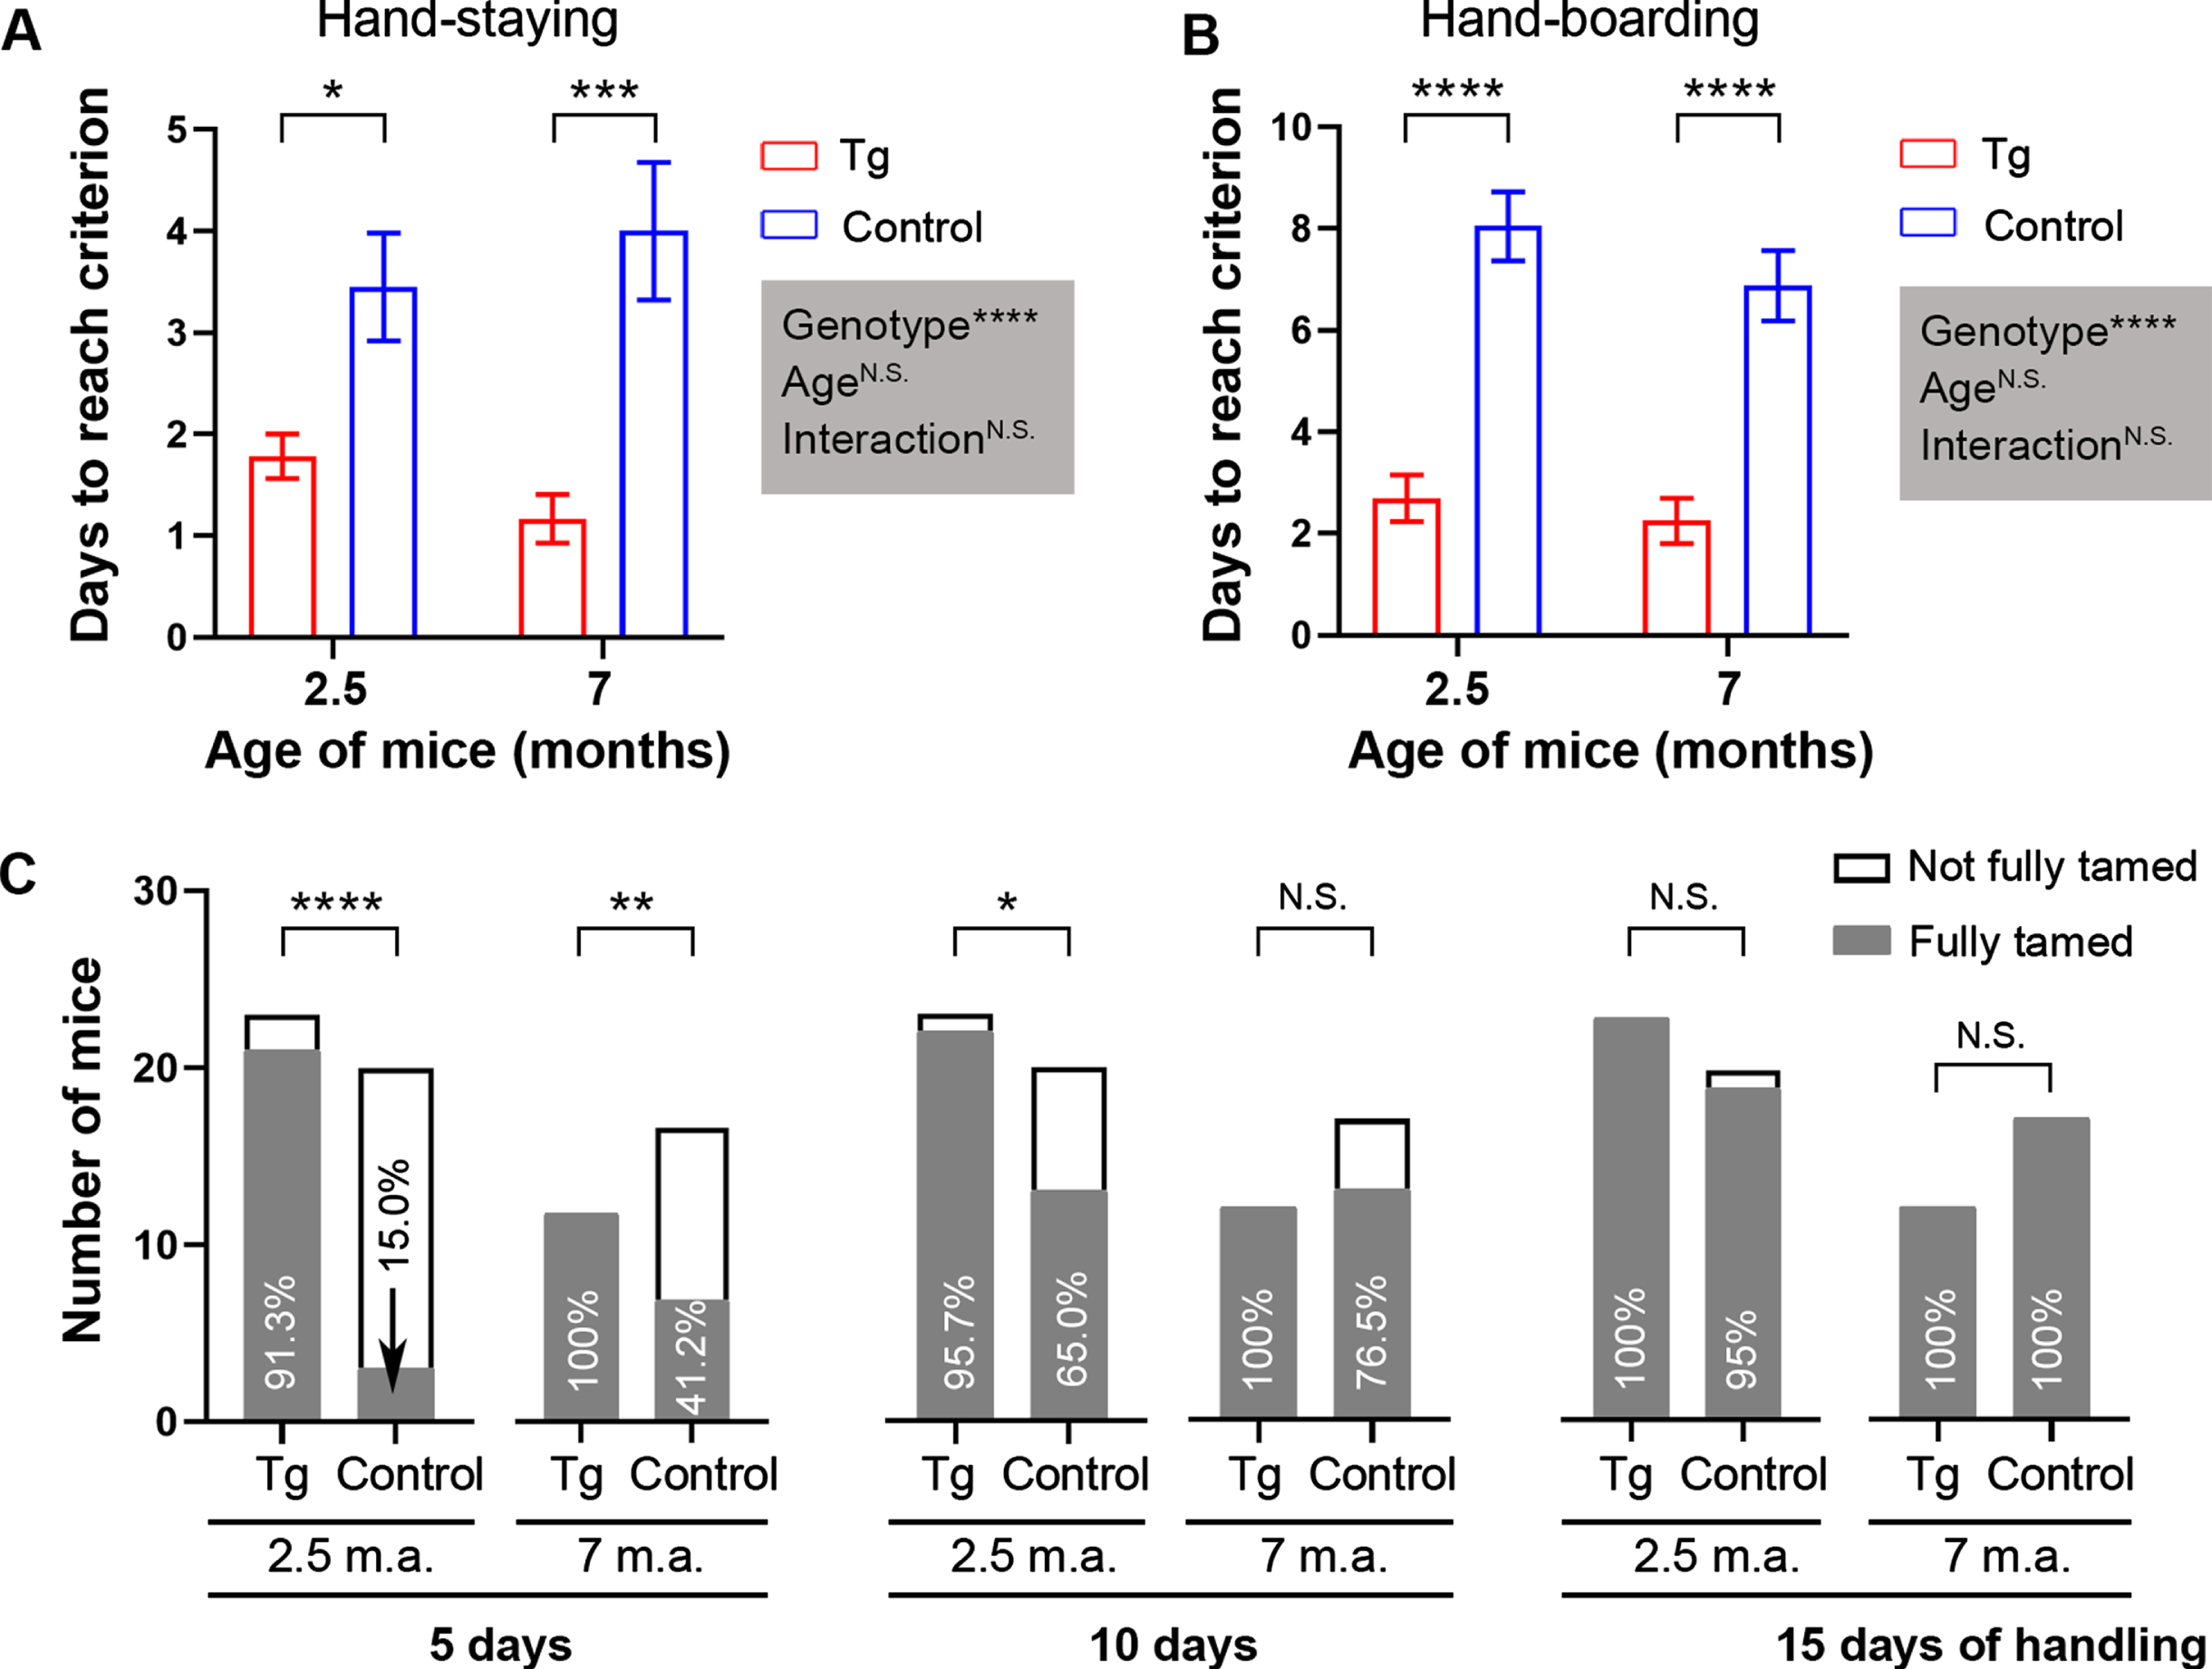 Shorter time is needed for 2.5- and 7-month-old 3×Tg-AD mice to be fully handling-habituated than for age-matched B6;129 genetic control mice. A, B) Bar charts showing days needed to reach the criterion in hand-staying test (A) and in hand-boarding assay (B). Data are expressed as mean±SEM (n = 12−23 mice/condition) and analyzed with two-way ANOVA. Shaded boxes show main factor effects and the interaction between factors. C) Stacked bar charts showing the number of mice that were fully tamed compared to those not fully tamed after 5, 10, and 15 days of handling-habituation. Contingency data were analyzed with Fisher’s exact test. Percentages of completely tamed mice are shown. *p < 0.05, ***p < 0.001, ****p < 0.0001. m.a., months of age.